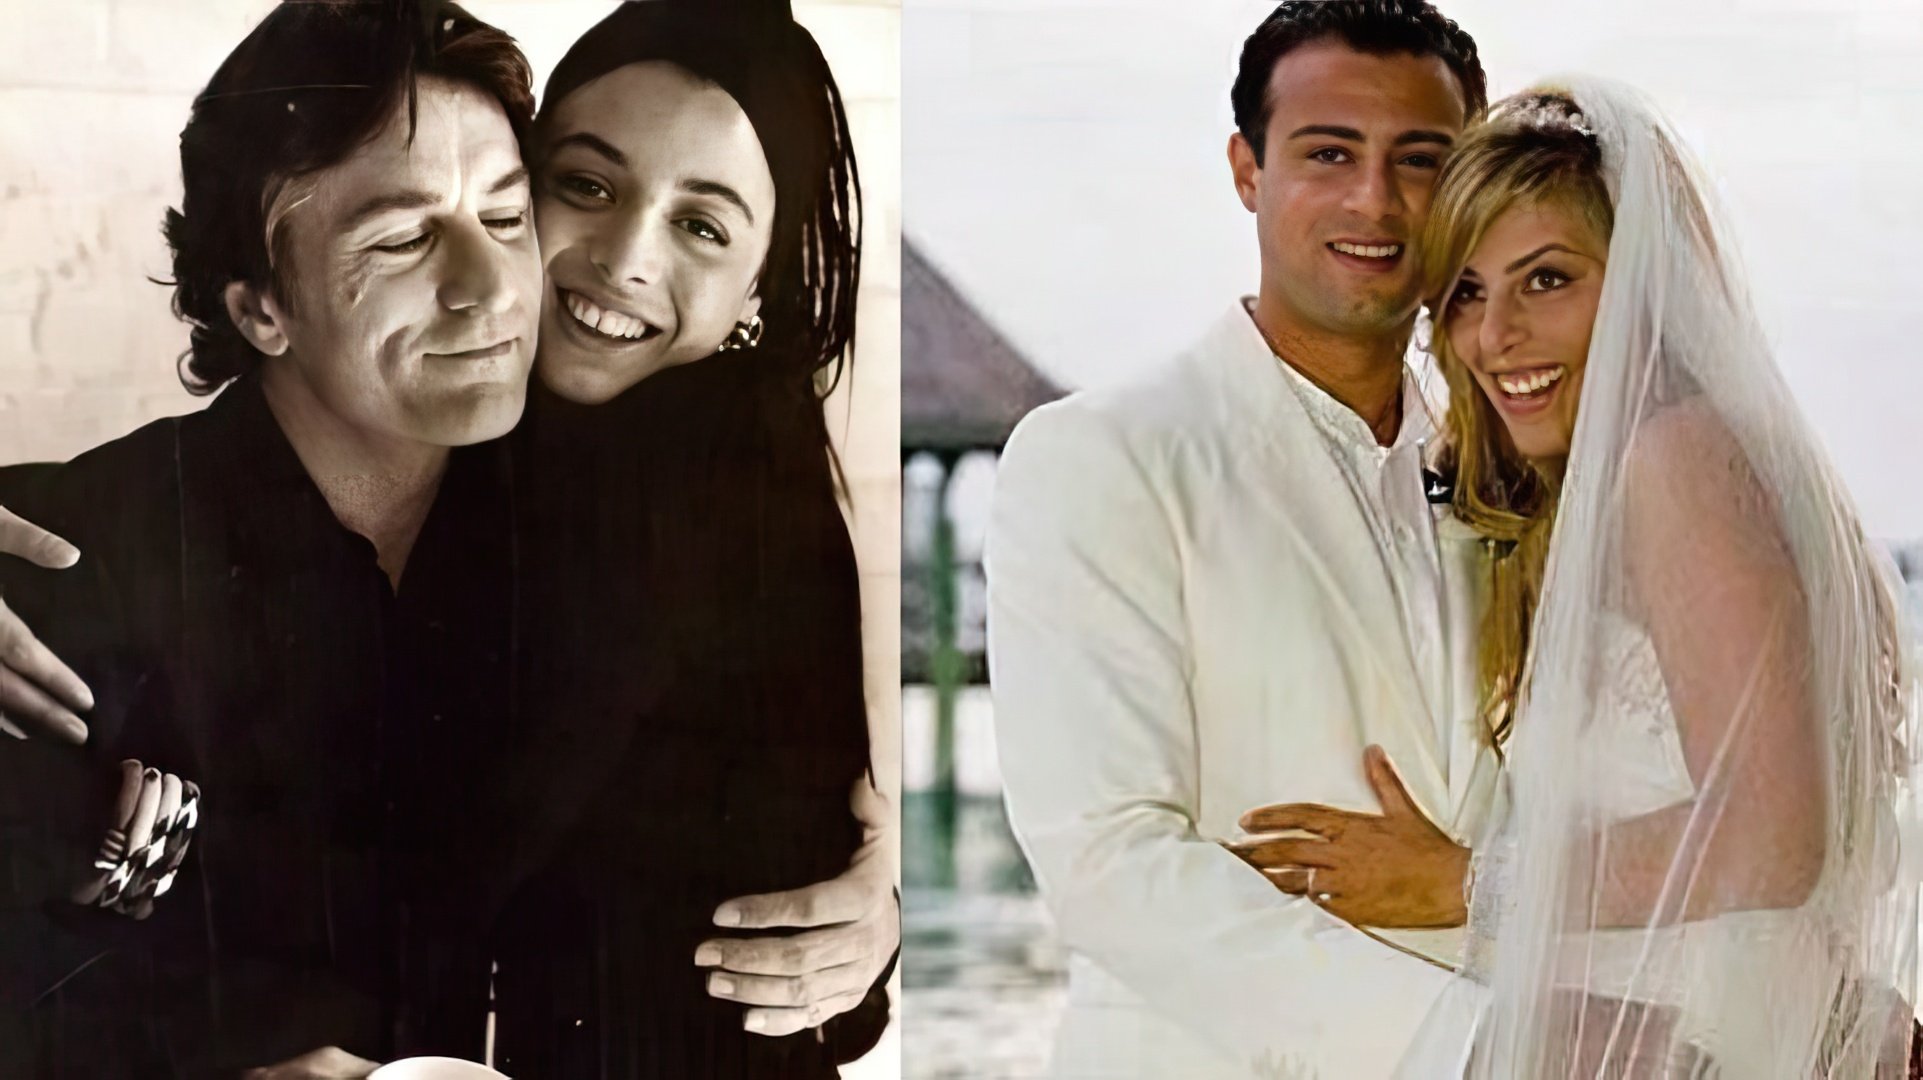 Left: De Niro and his adopted daughter Drena, right: Raphael De Niro with his wife